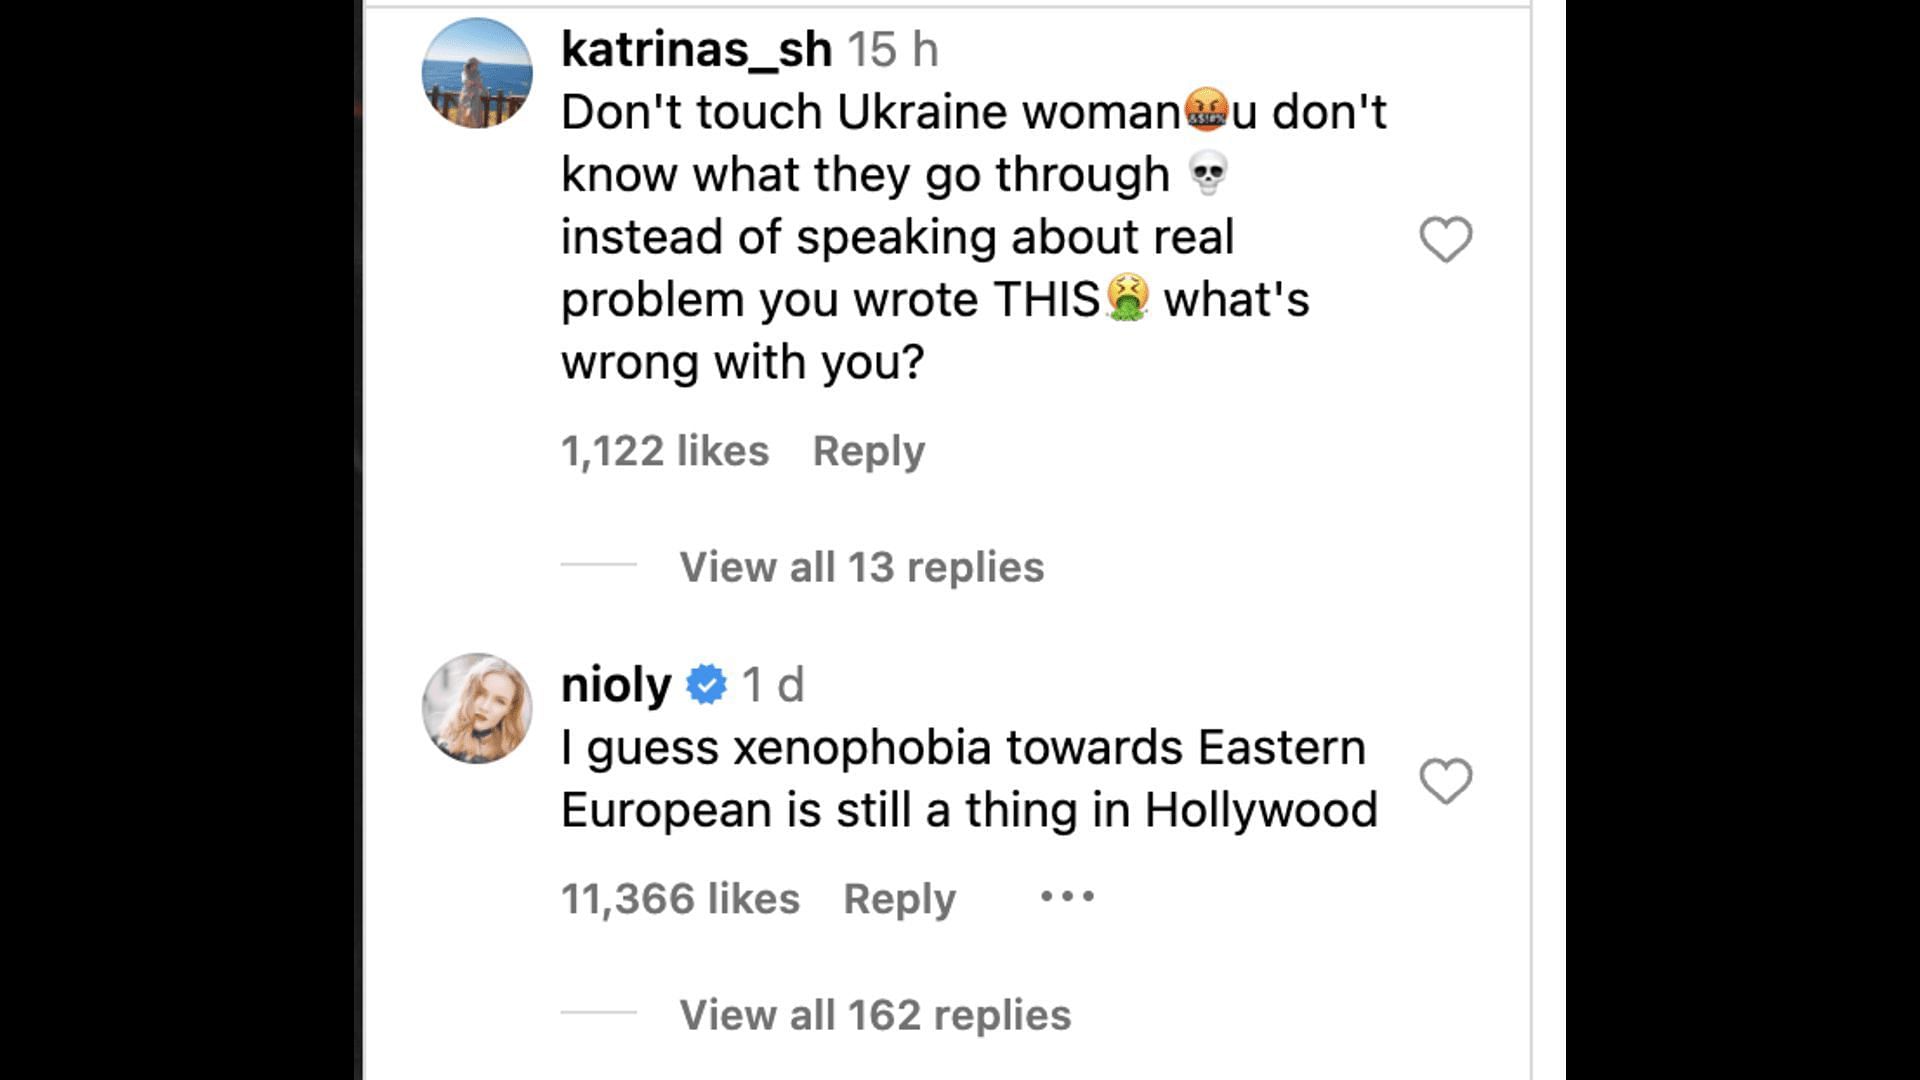 Social media users bashed Fox for using Ukrainian reference in a demeaning way in her caption on Instagram: Reactions explored. (Image via @meganfox/ Instagram)